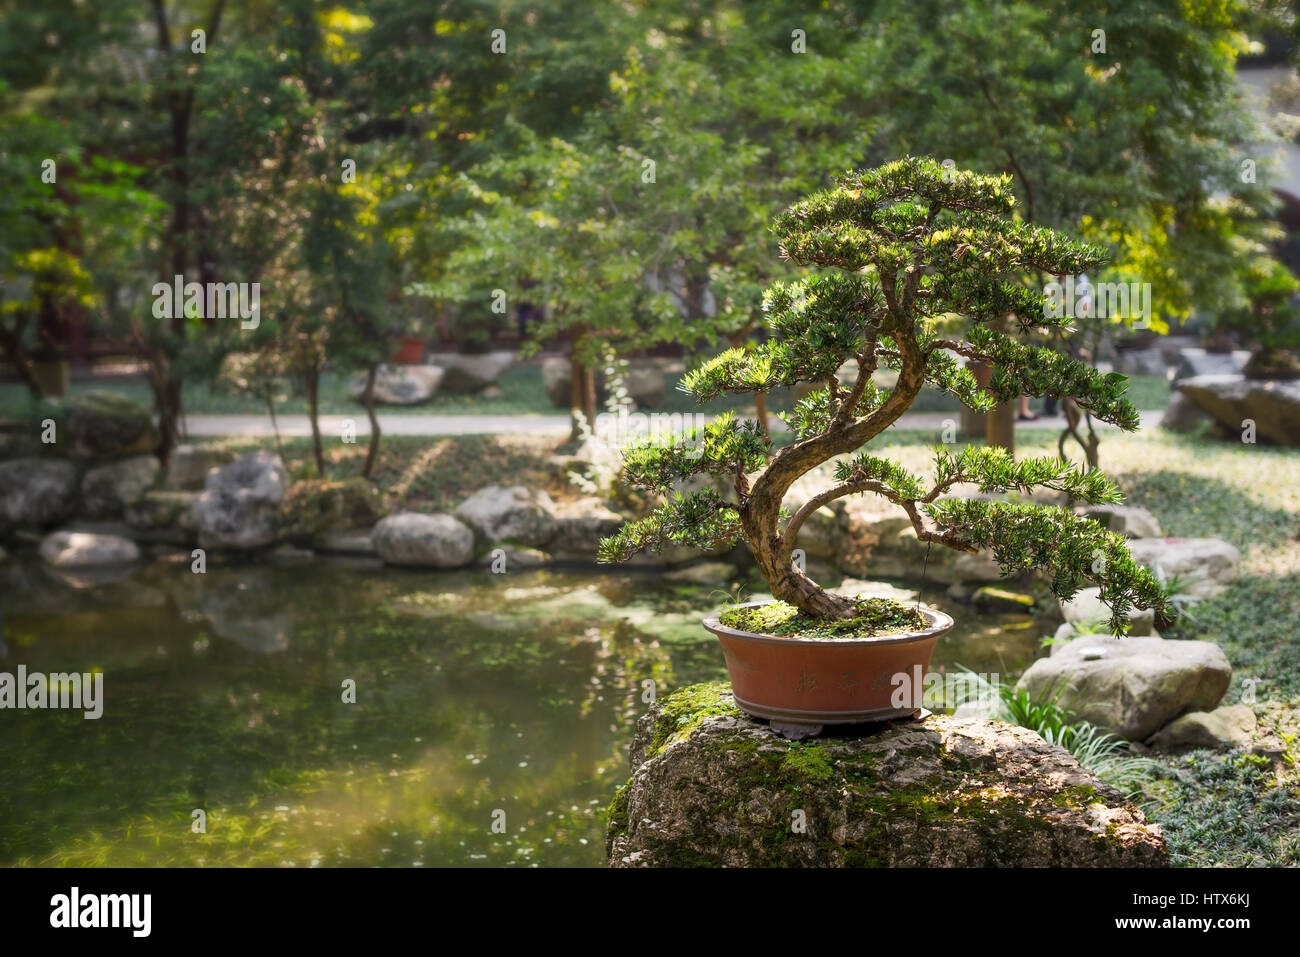 Bonsai on a rock by a pond surrounded by trees, Chengdu, China Stock Photo